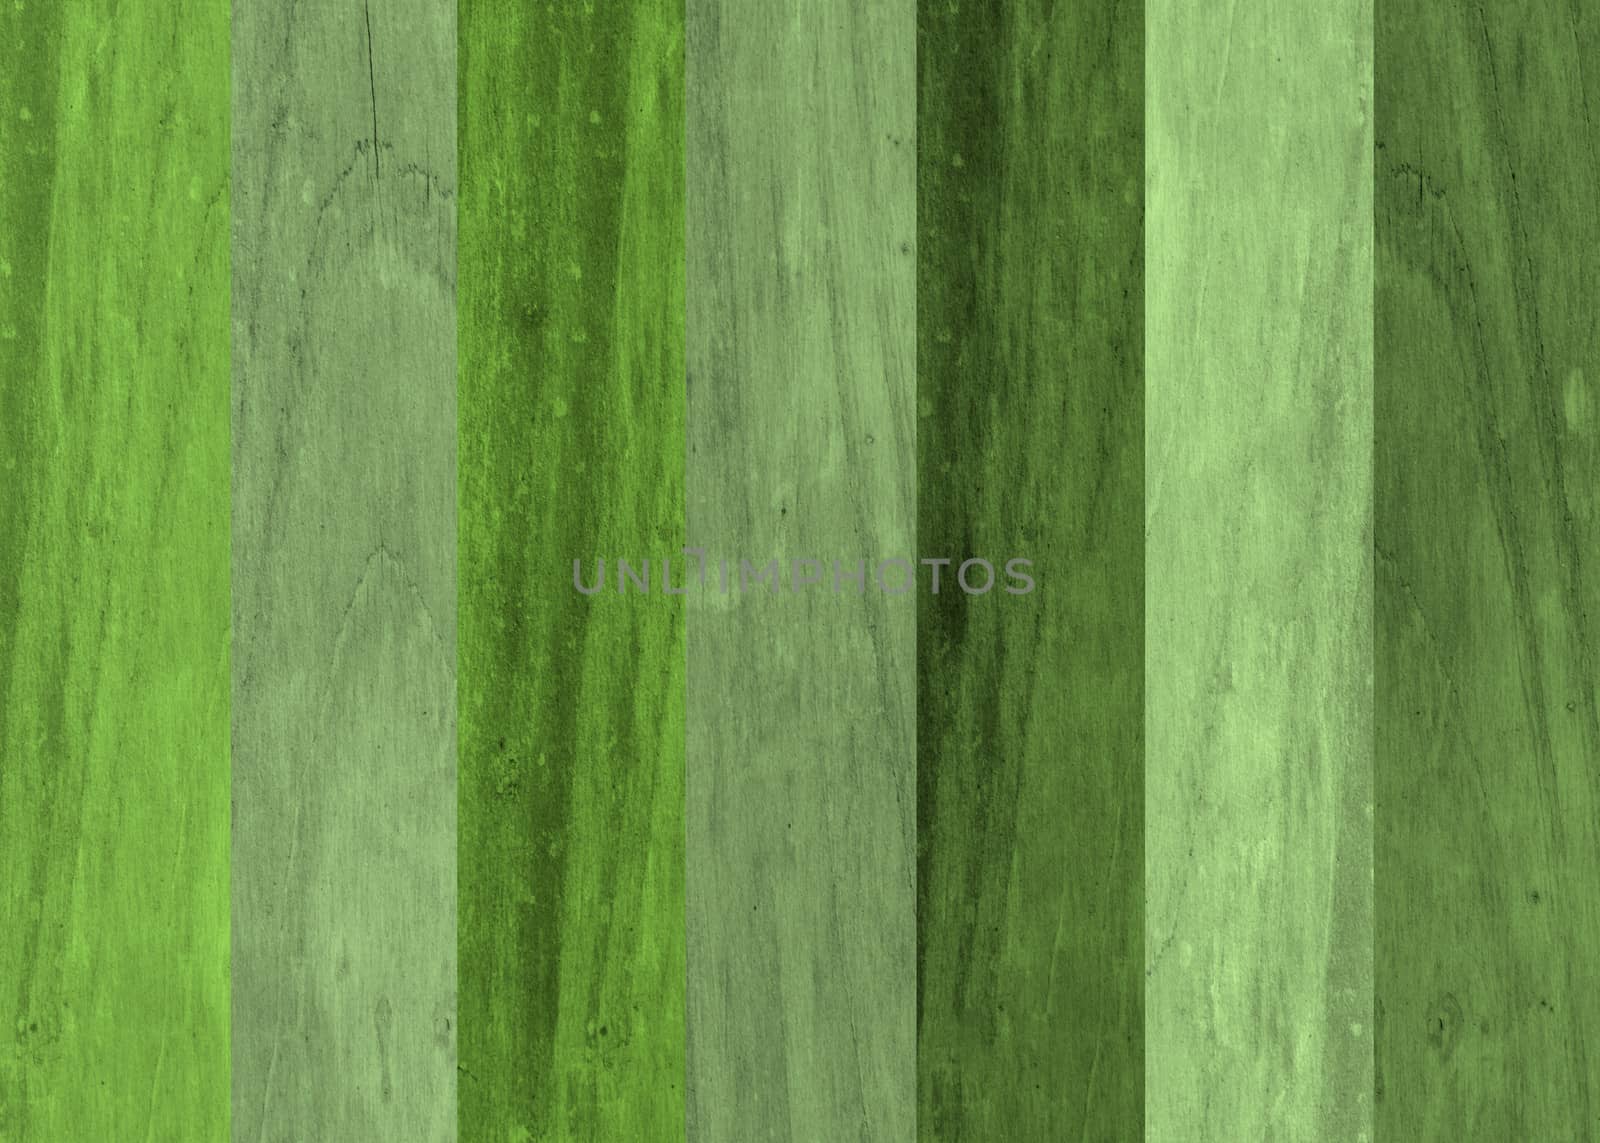 bright green wooden texture background by ftlaudgirl